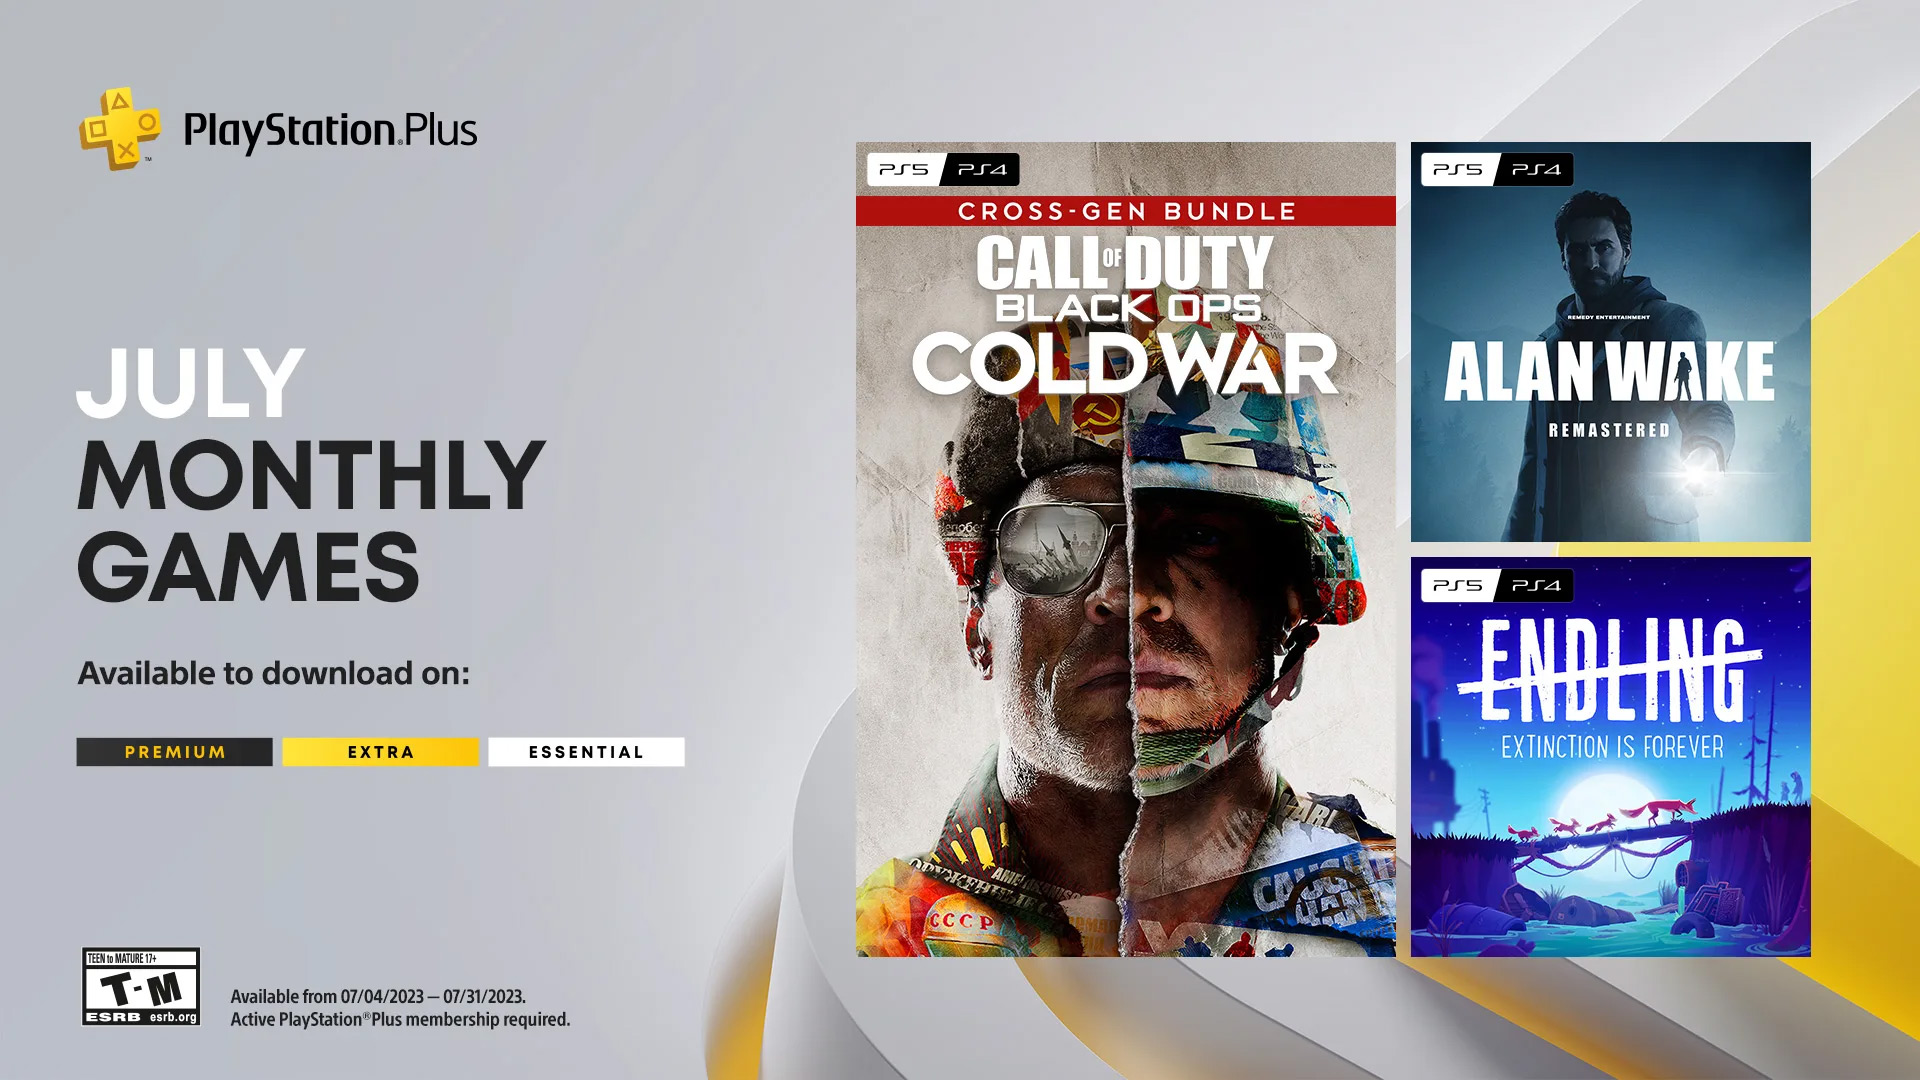 These games will be available starting July 4